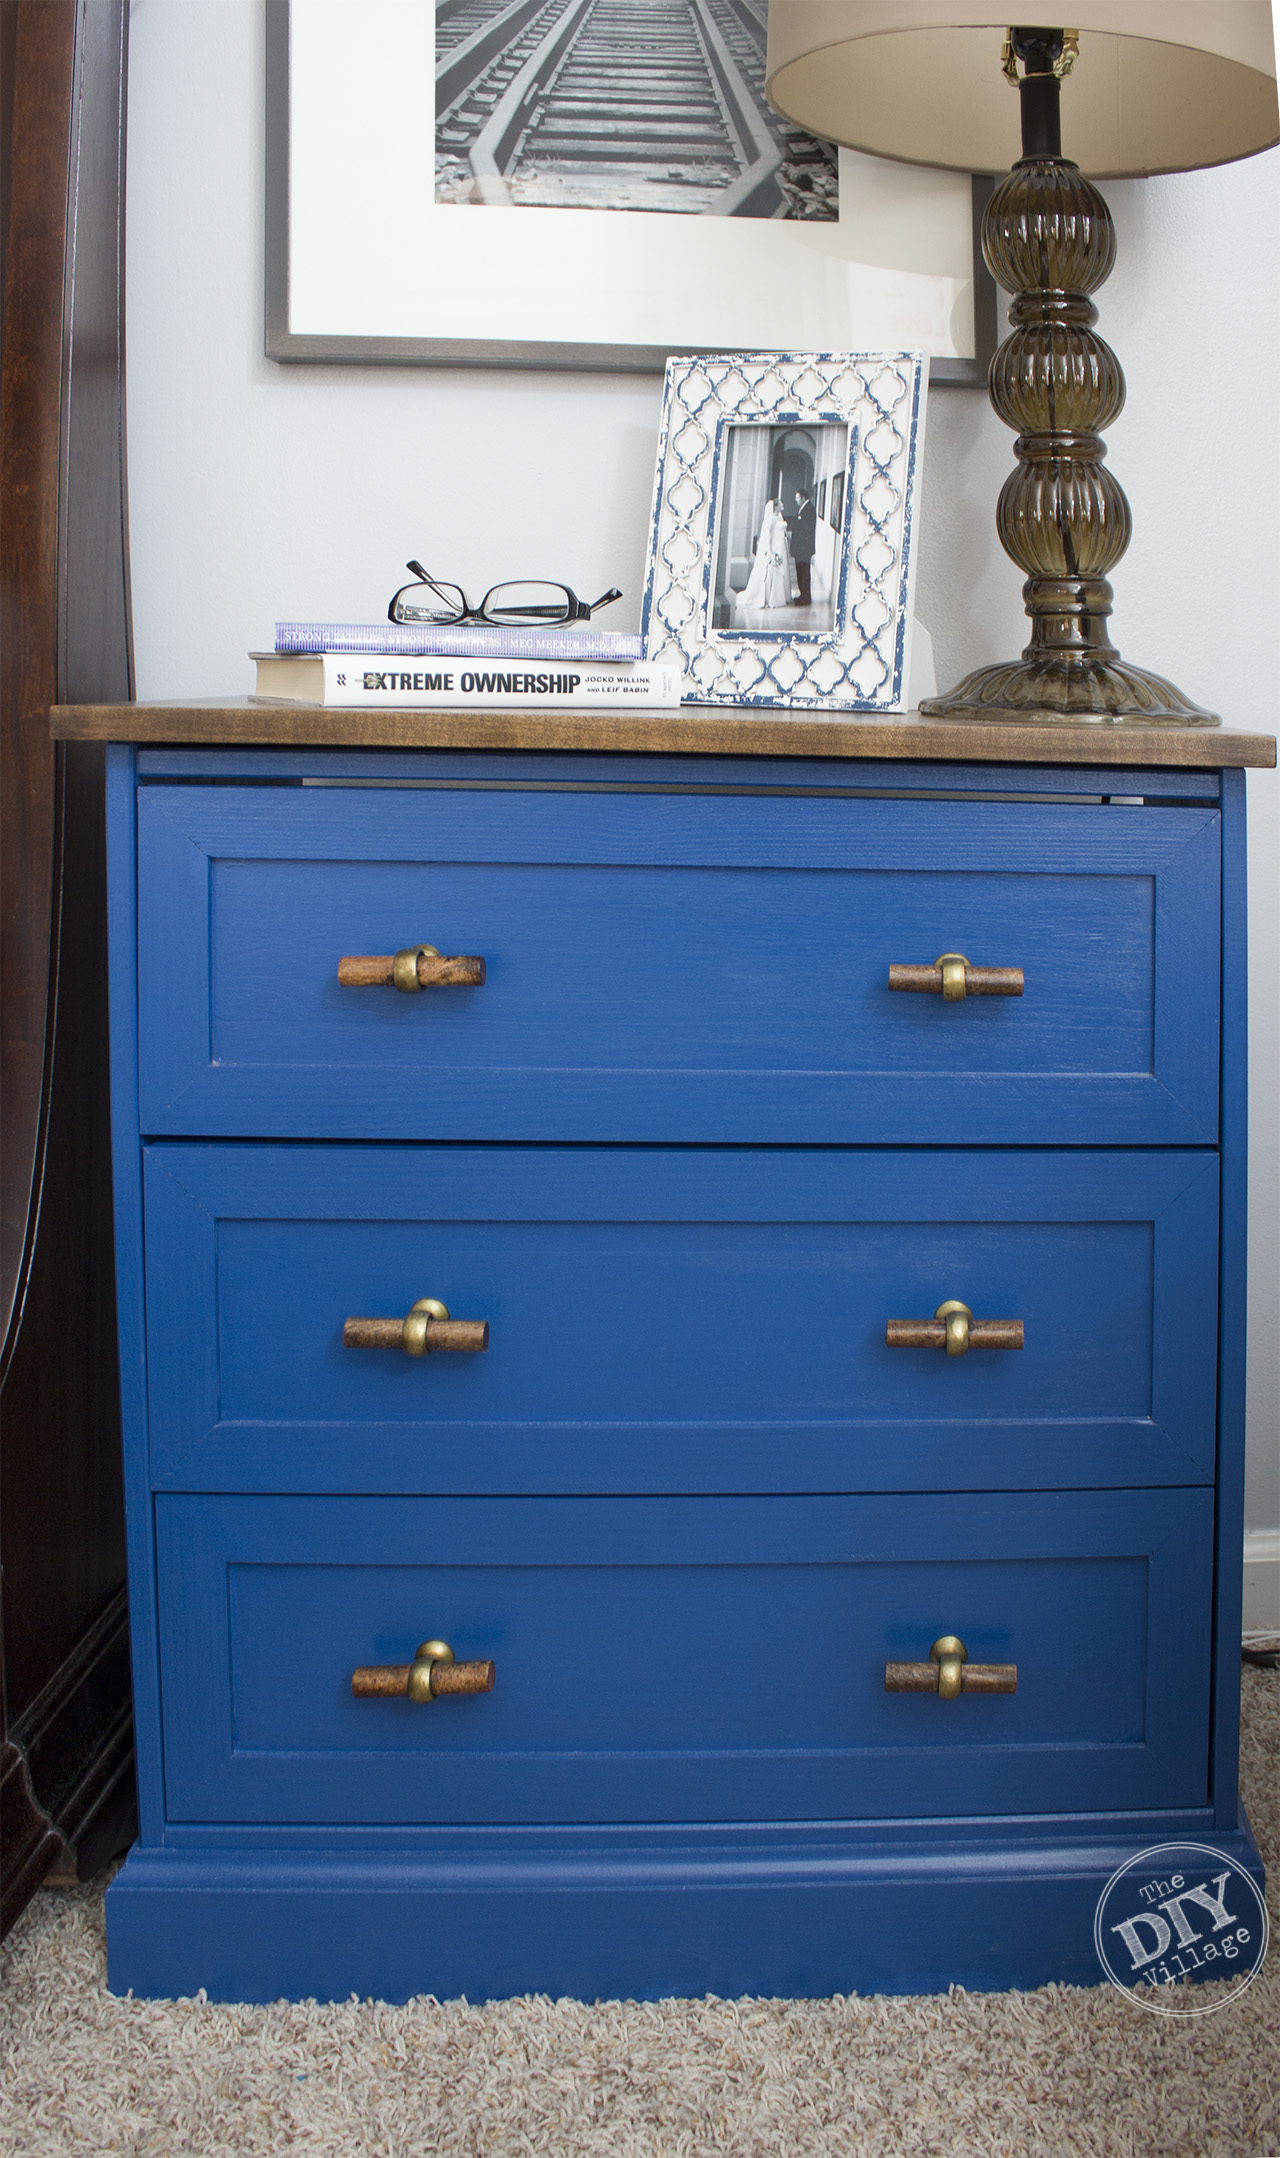 IKEA RAST Makeover from dresser to sophisticated nightstand. Easy and inexpensive project. LOVE this look, must try! #Ikeahack #Ikearast #rastmakeover #nightstand